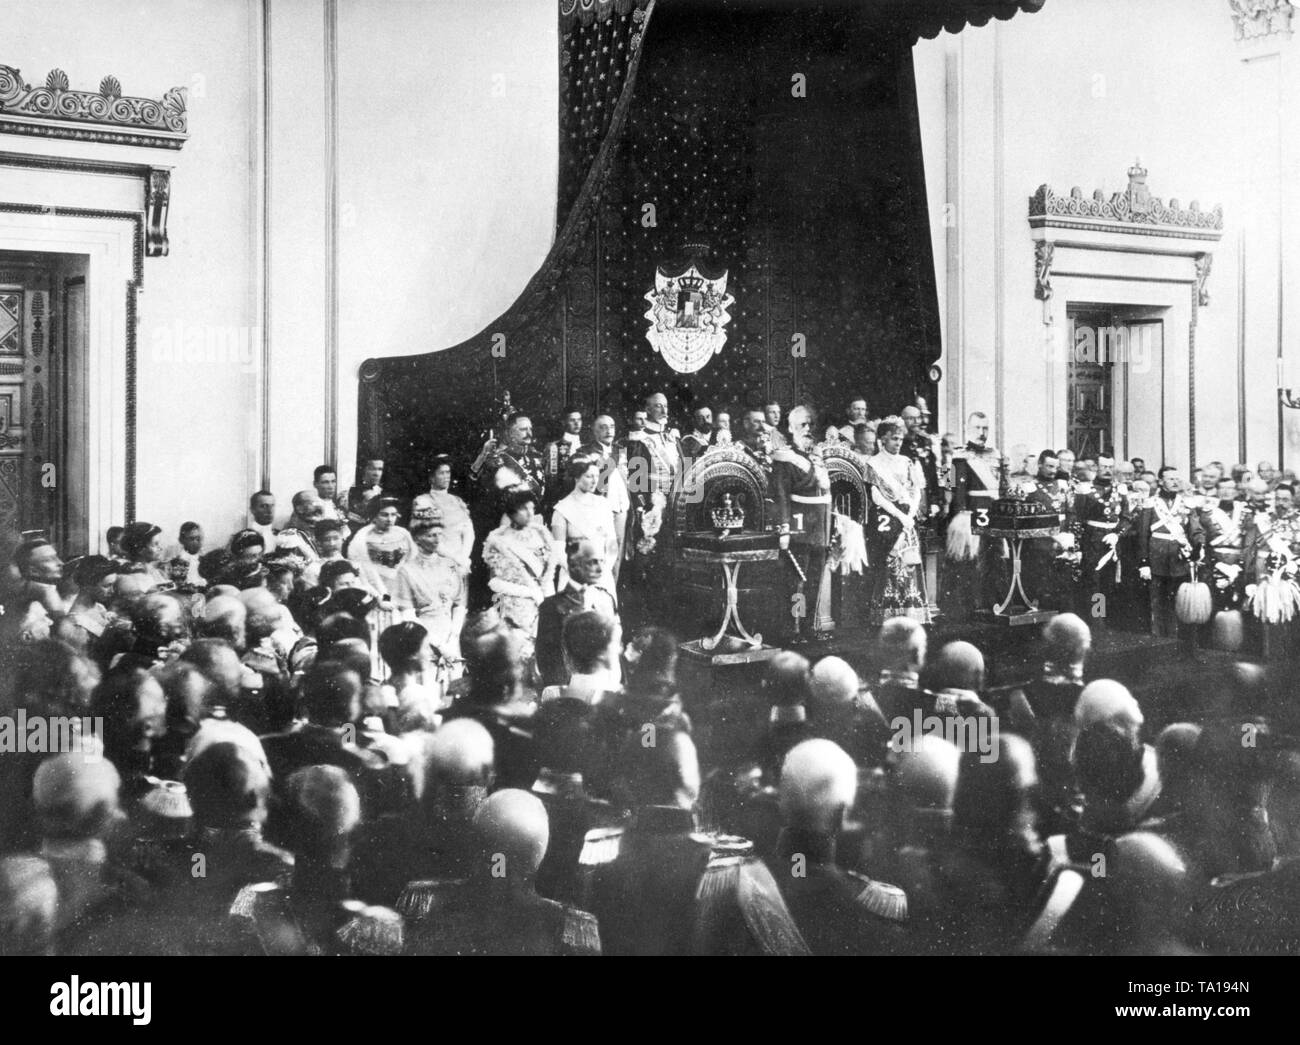 The accession of Ludwig III of Bavaria to the throne. In the photo, the homage in the large throne hall of the Munich Residenz.(1: Ludwig III of Bavaria., 2. Queen Maria Theresa and 3. Rupprecht, Crown Prince of Bavaria). Stock Photo